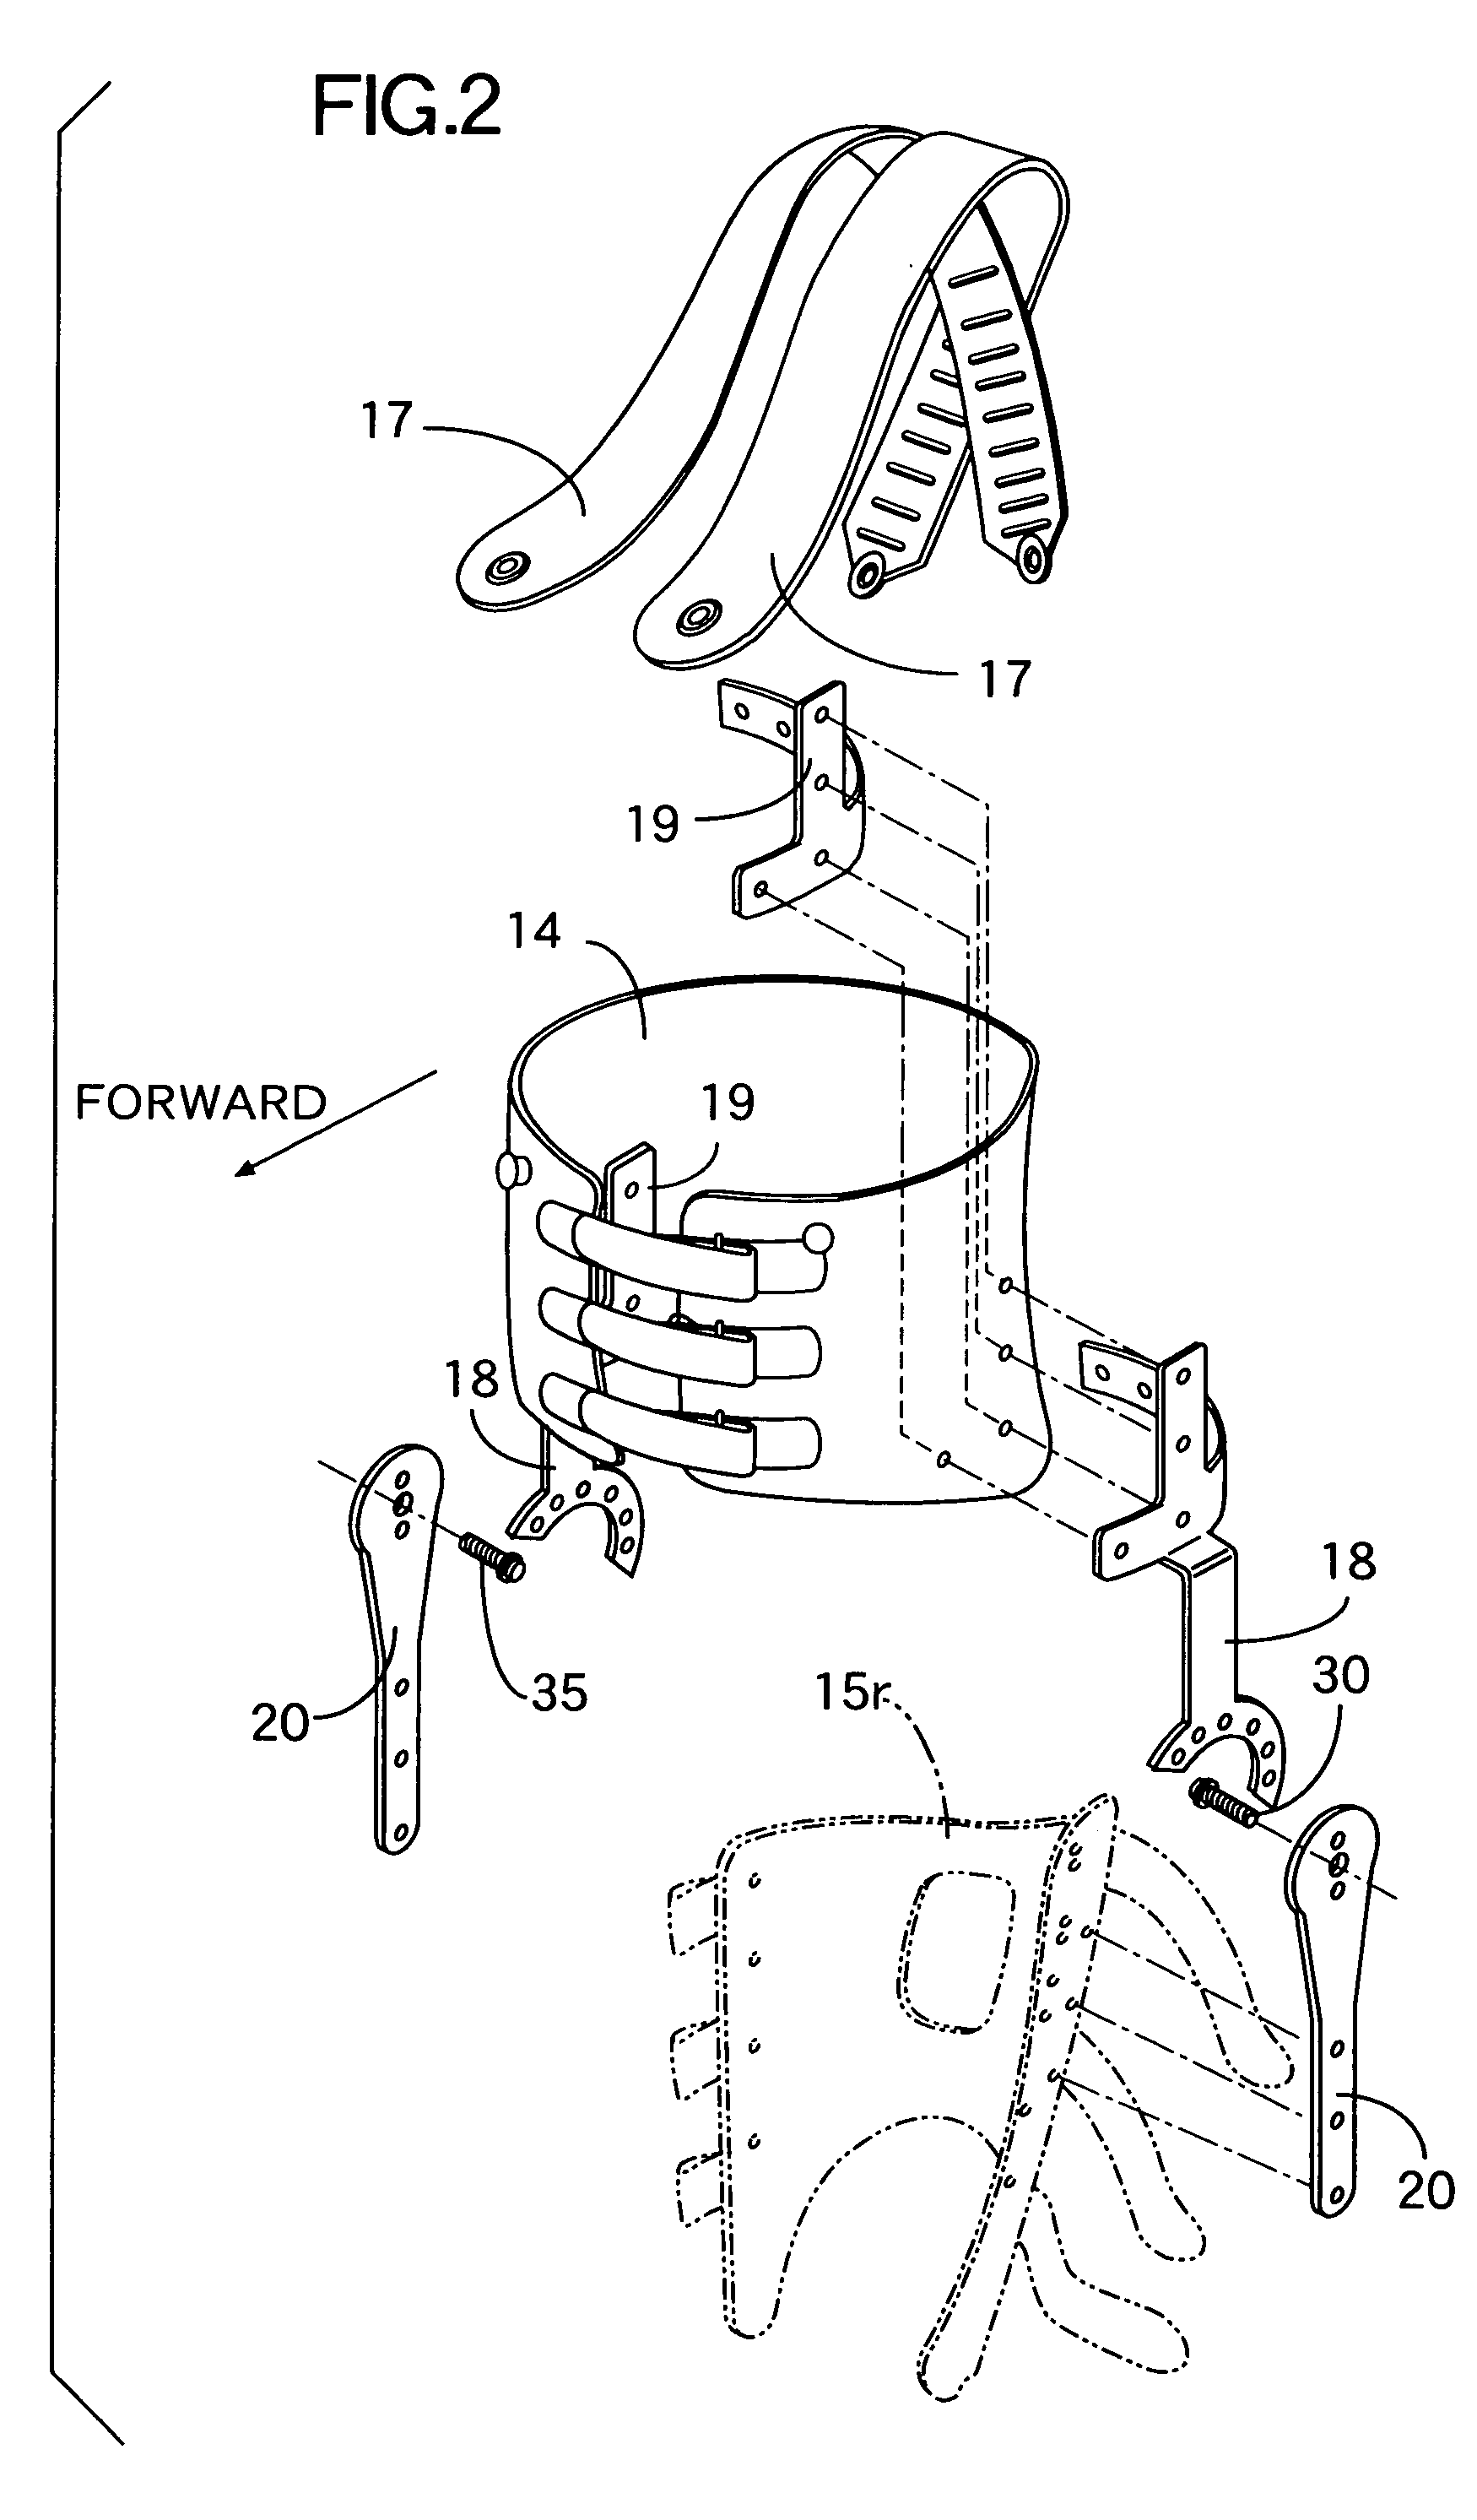 Speed reducer for walk assist apparatus